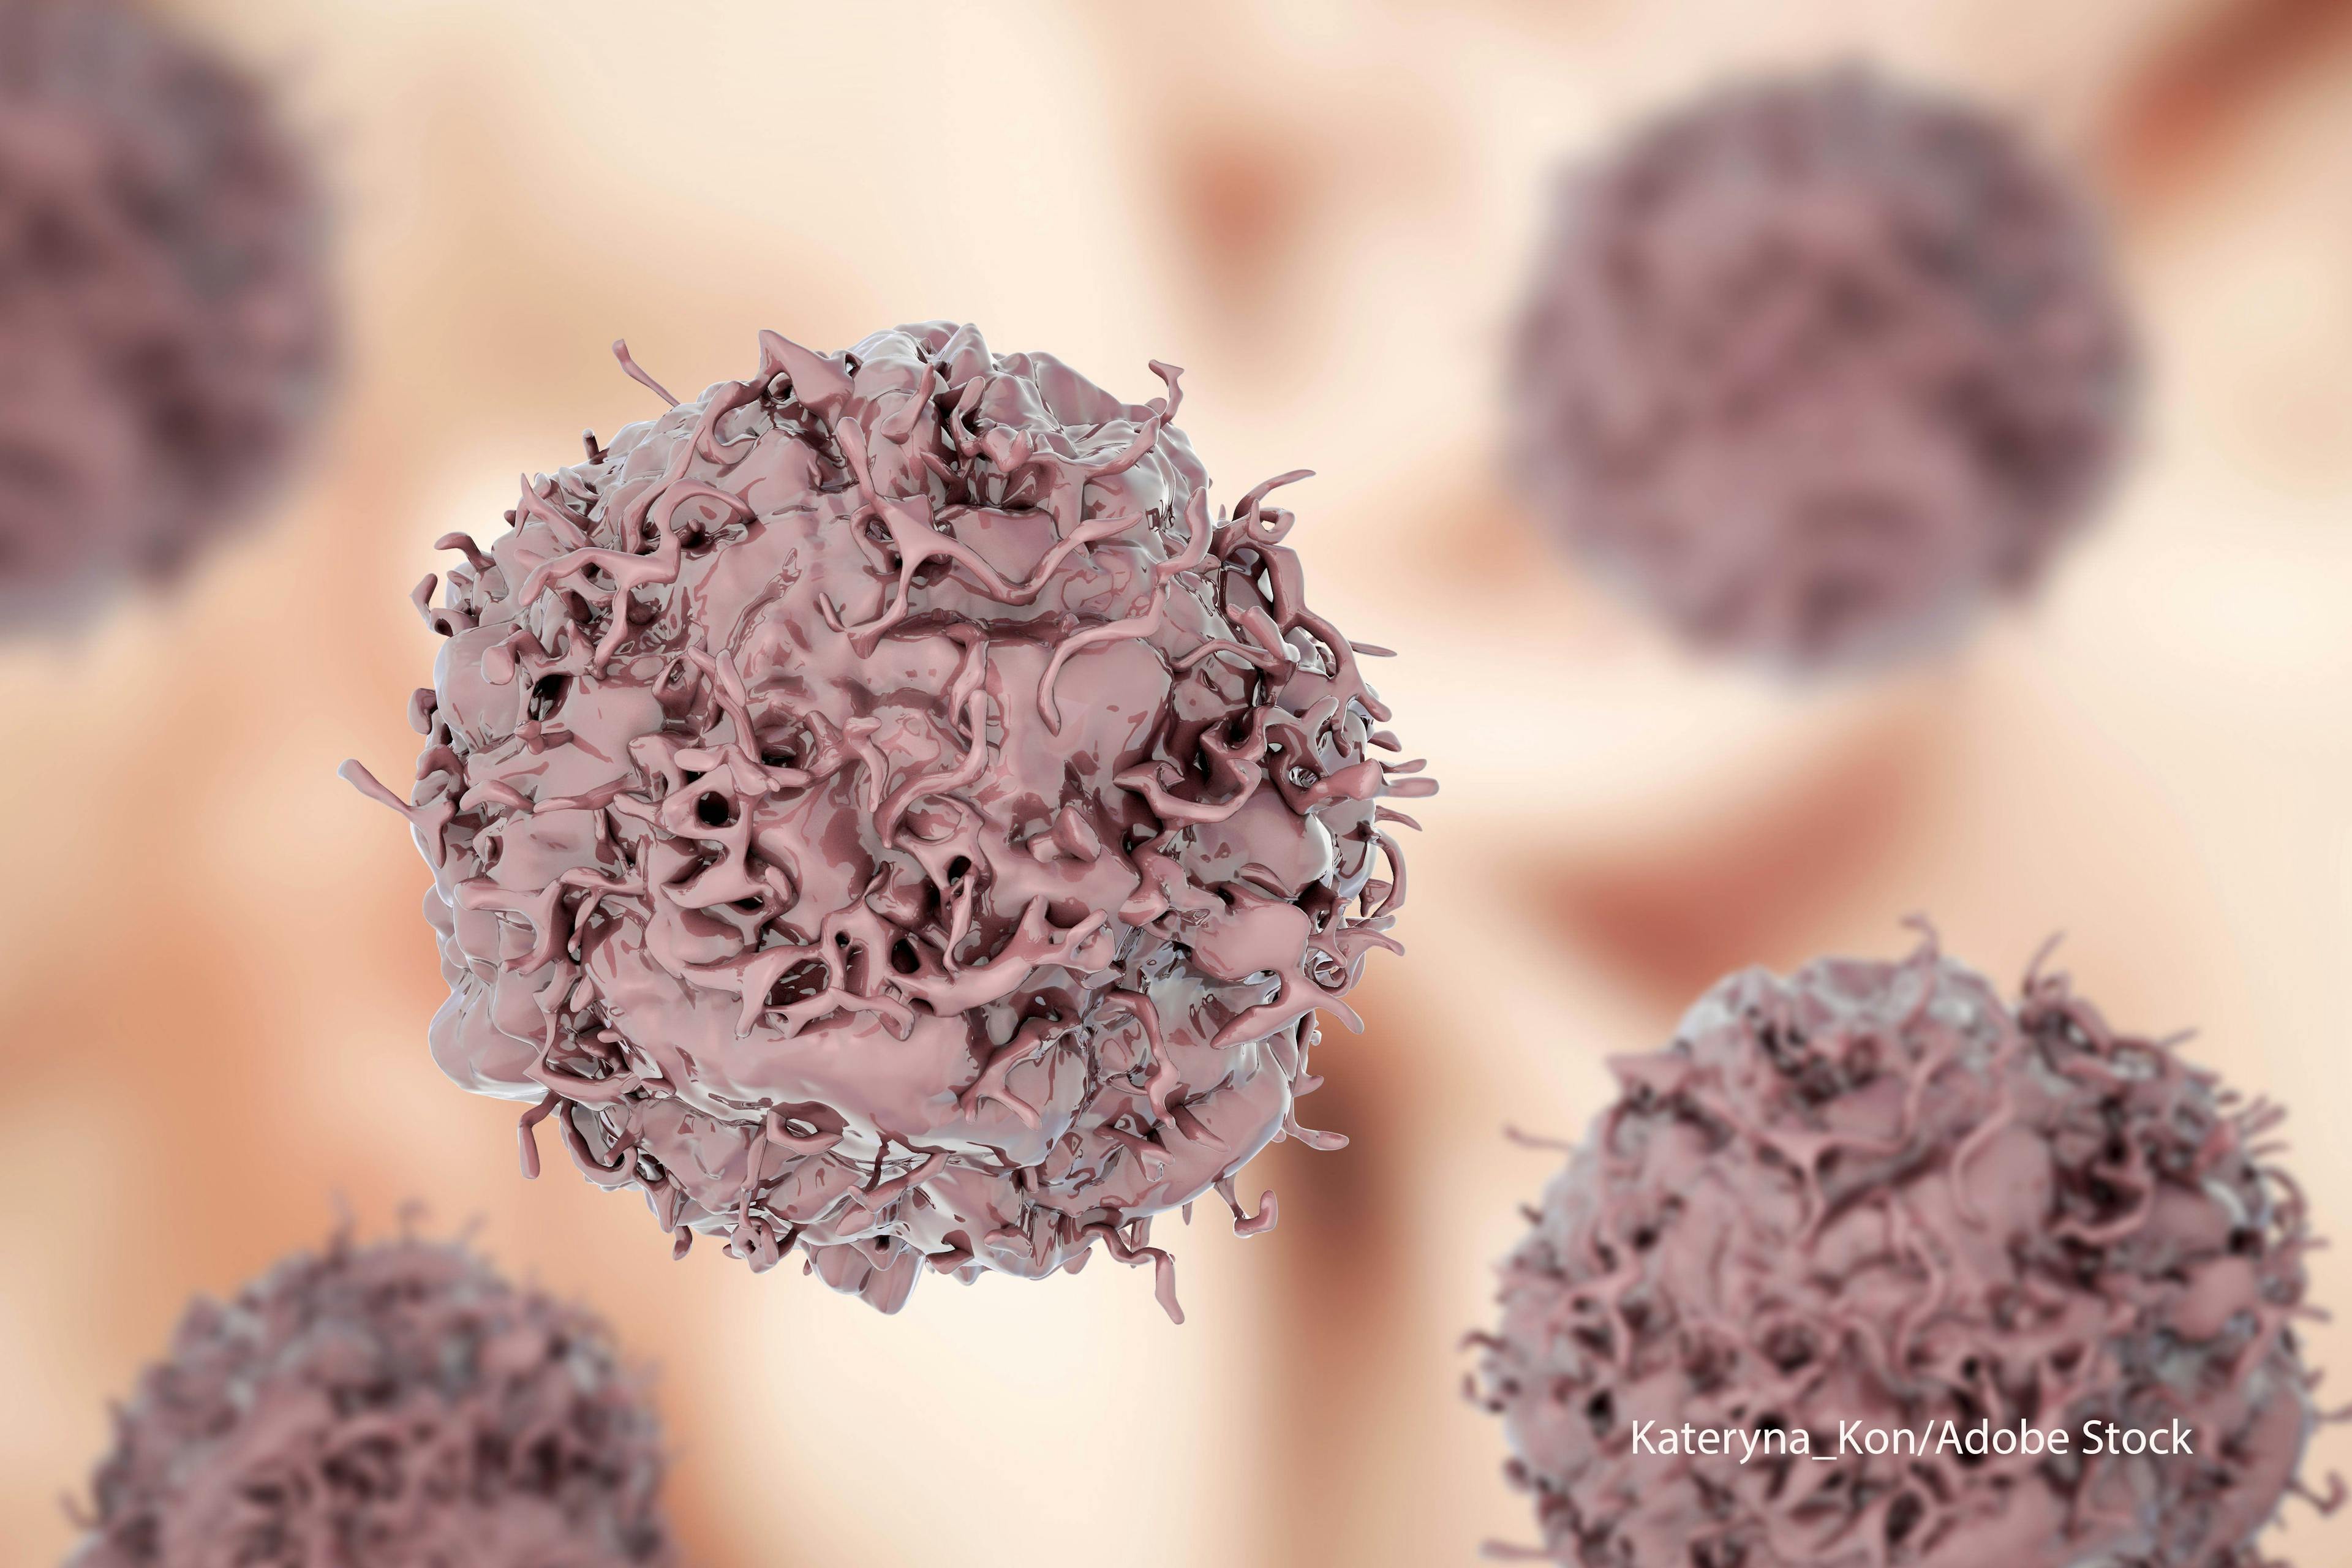 Immunotherapy Combinations Add Treatment Options in Advanced NSCLC